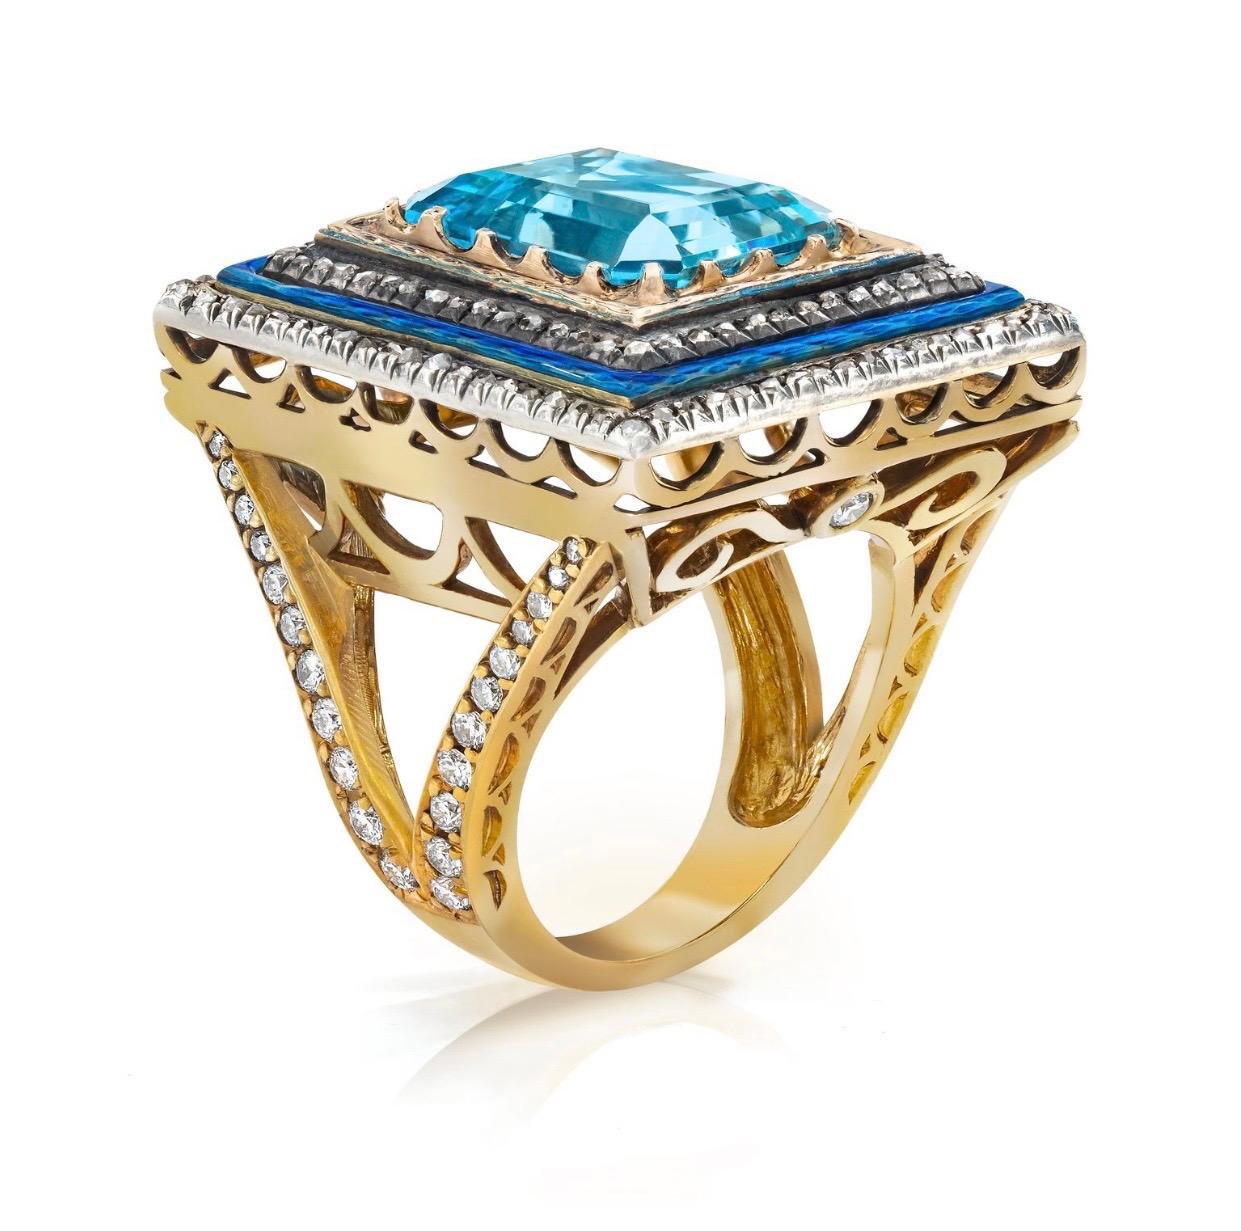 Known for our one-of-a-kind creations, this aquamarine ring makes quite the statement. 
What was once  a Victorian brooch Circa 1880’s has been completely transformed into a spectacular statement ring.
1 emerald cut aquamarine approx 8.45 CTW
Blue